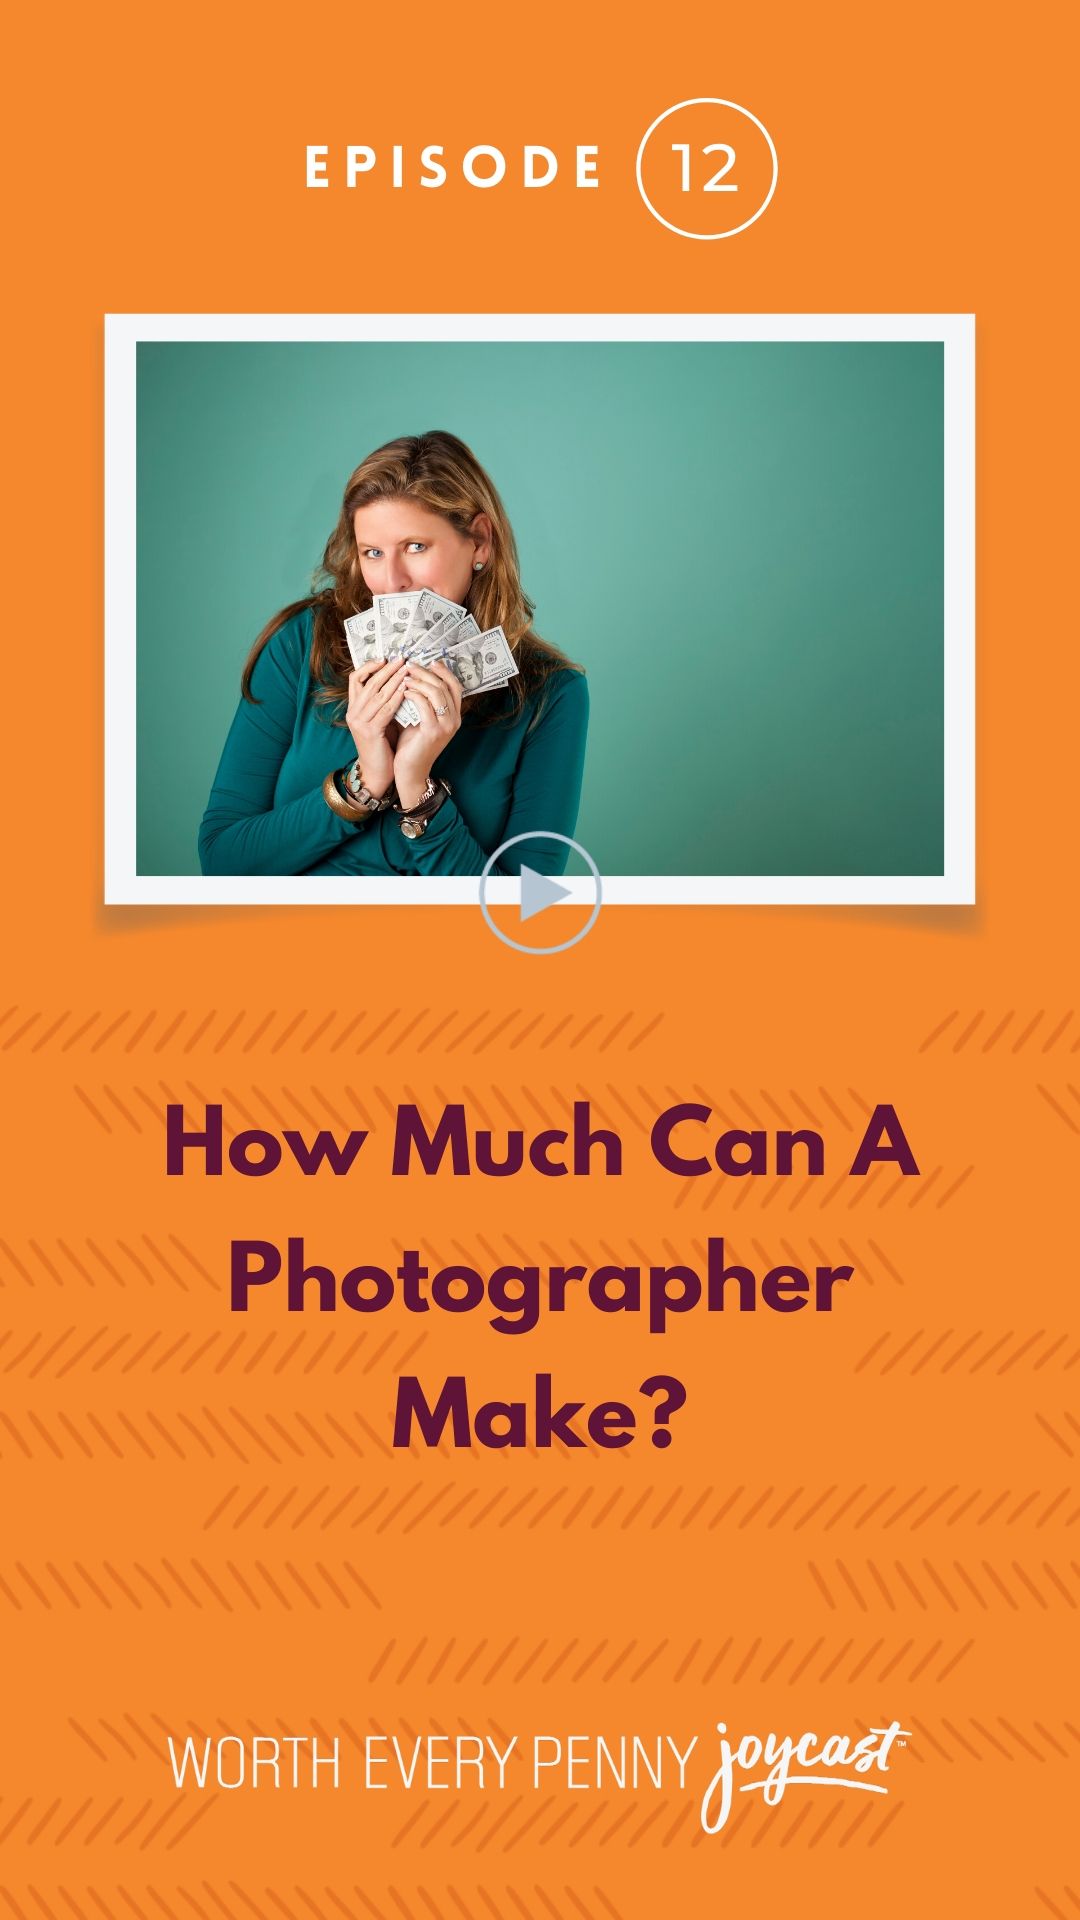 Episode 12: How Much Can A Photographer Make?